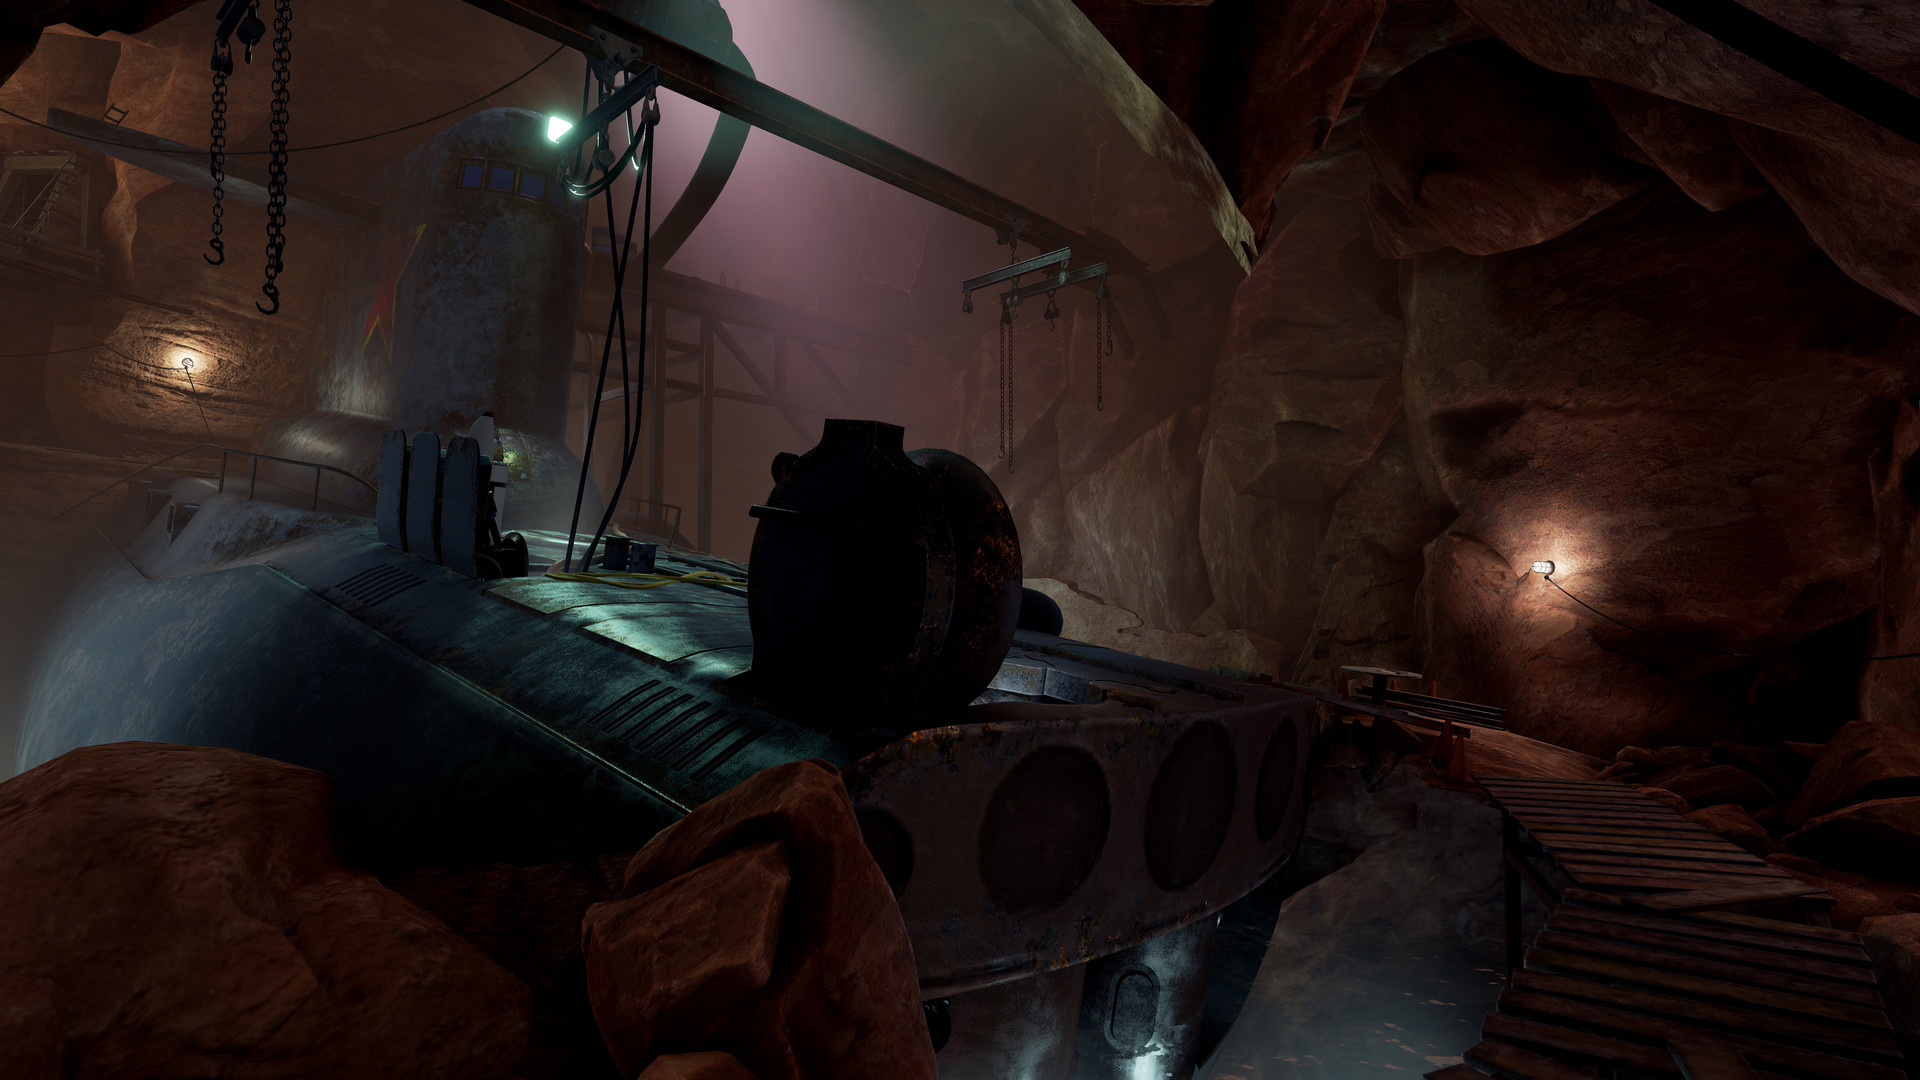 download cyan obduction